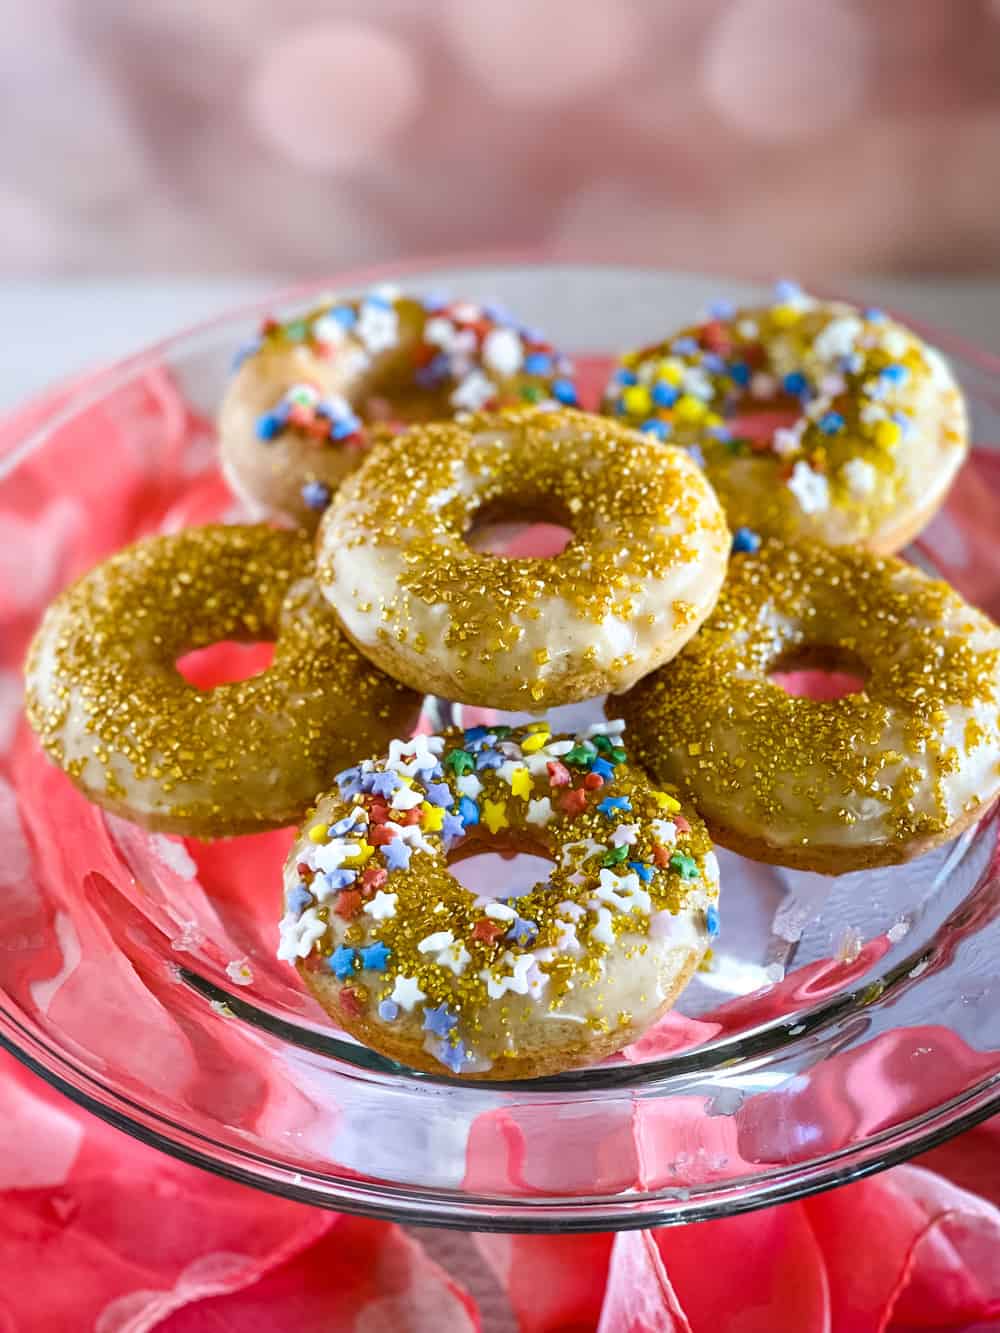 glass cake plate holding glazed decorated donuts